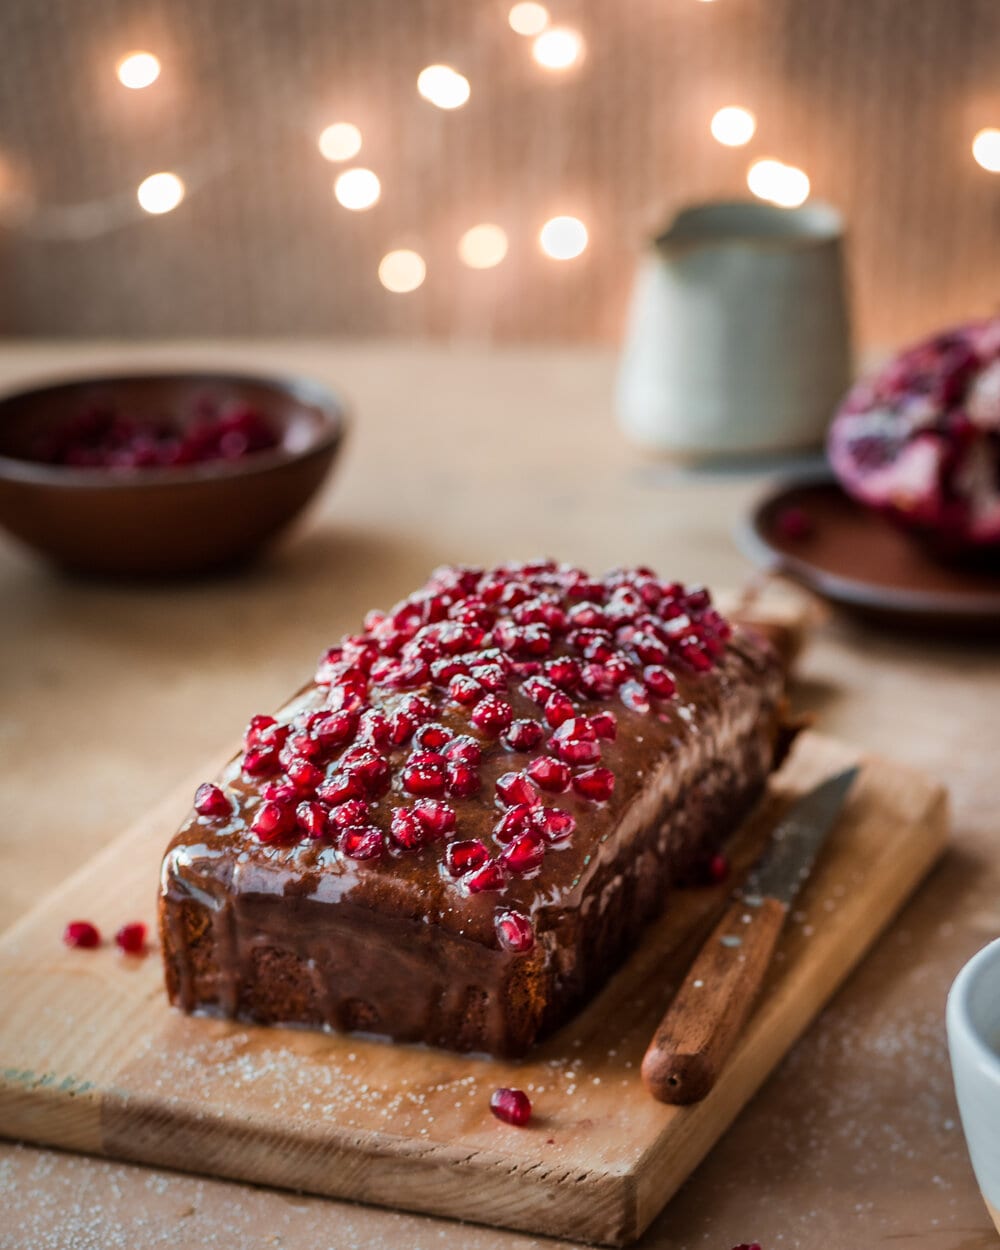 Gingerbread cake with icing and pomegranate seeds on a wood cutting board.